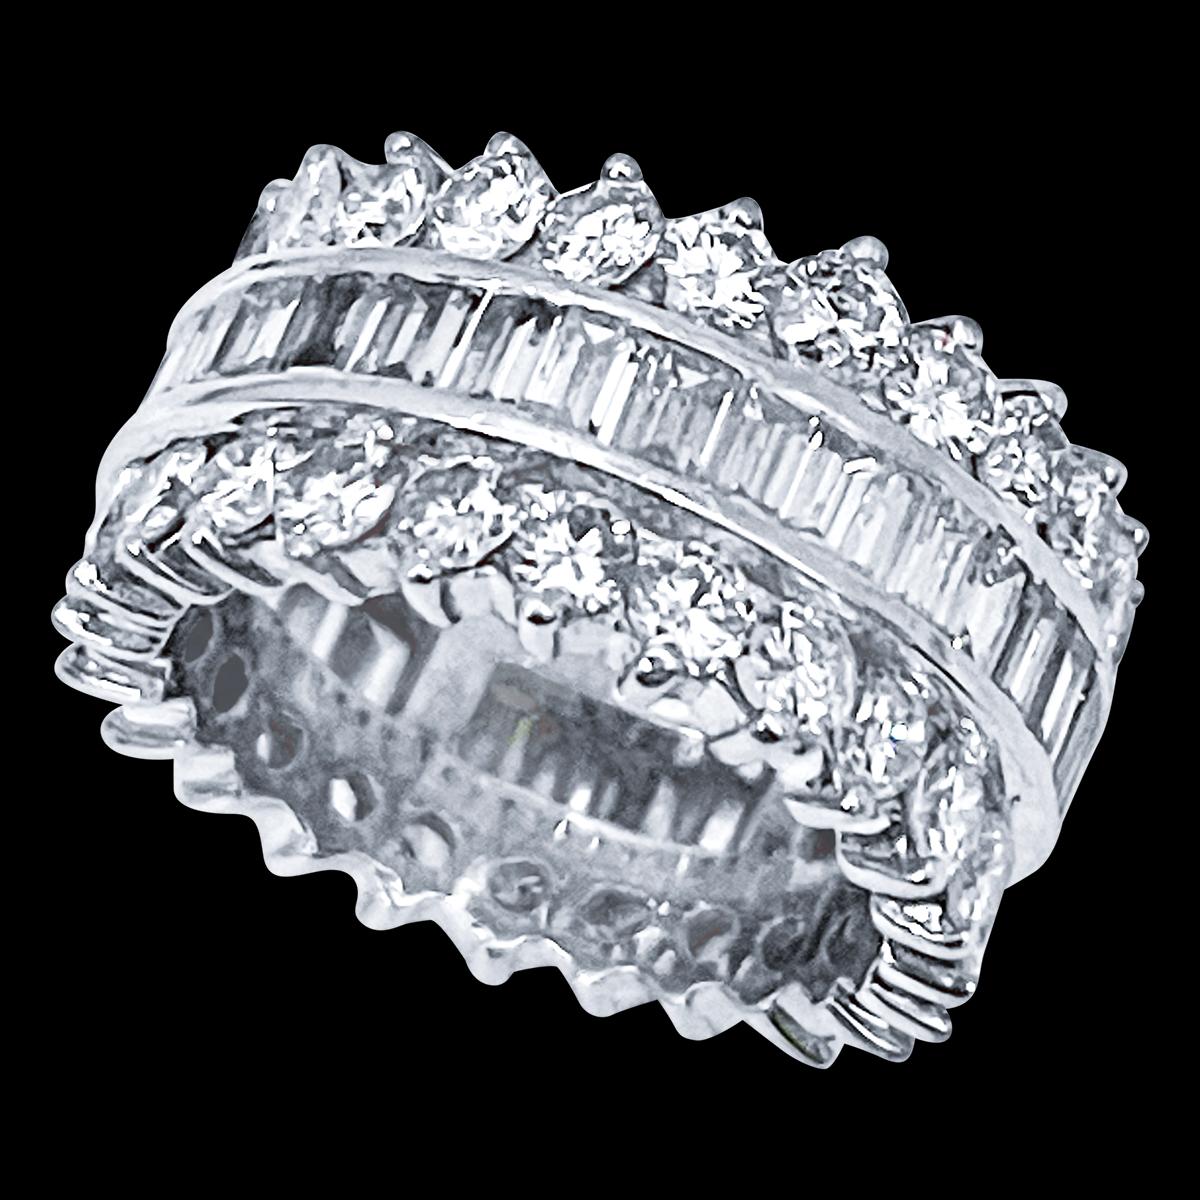 beautiful estate piece
platinum band three row band 
center row has baguettes and each side of the center row is round diamond band.
Size 6
Very clean and shiny diamonds.
This full eternity band features Three rows of round brilliant cut diamonds .